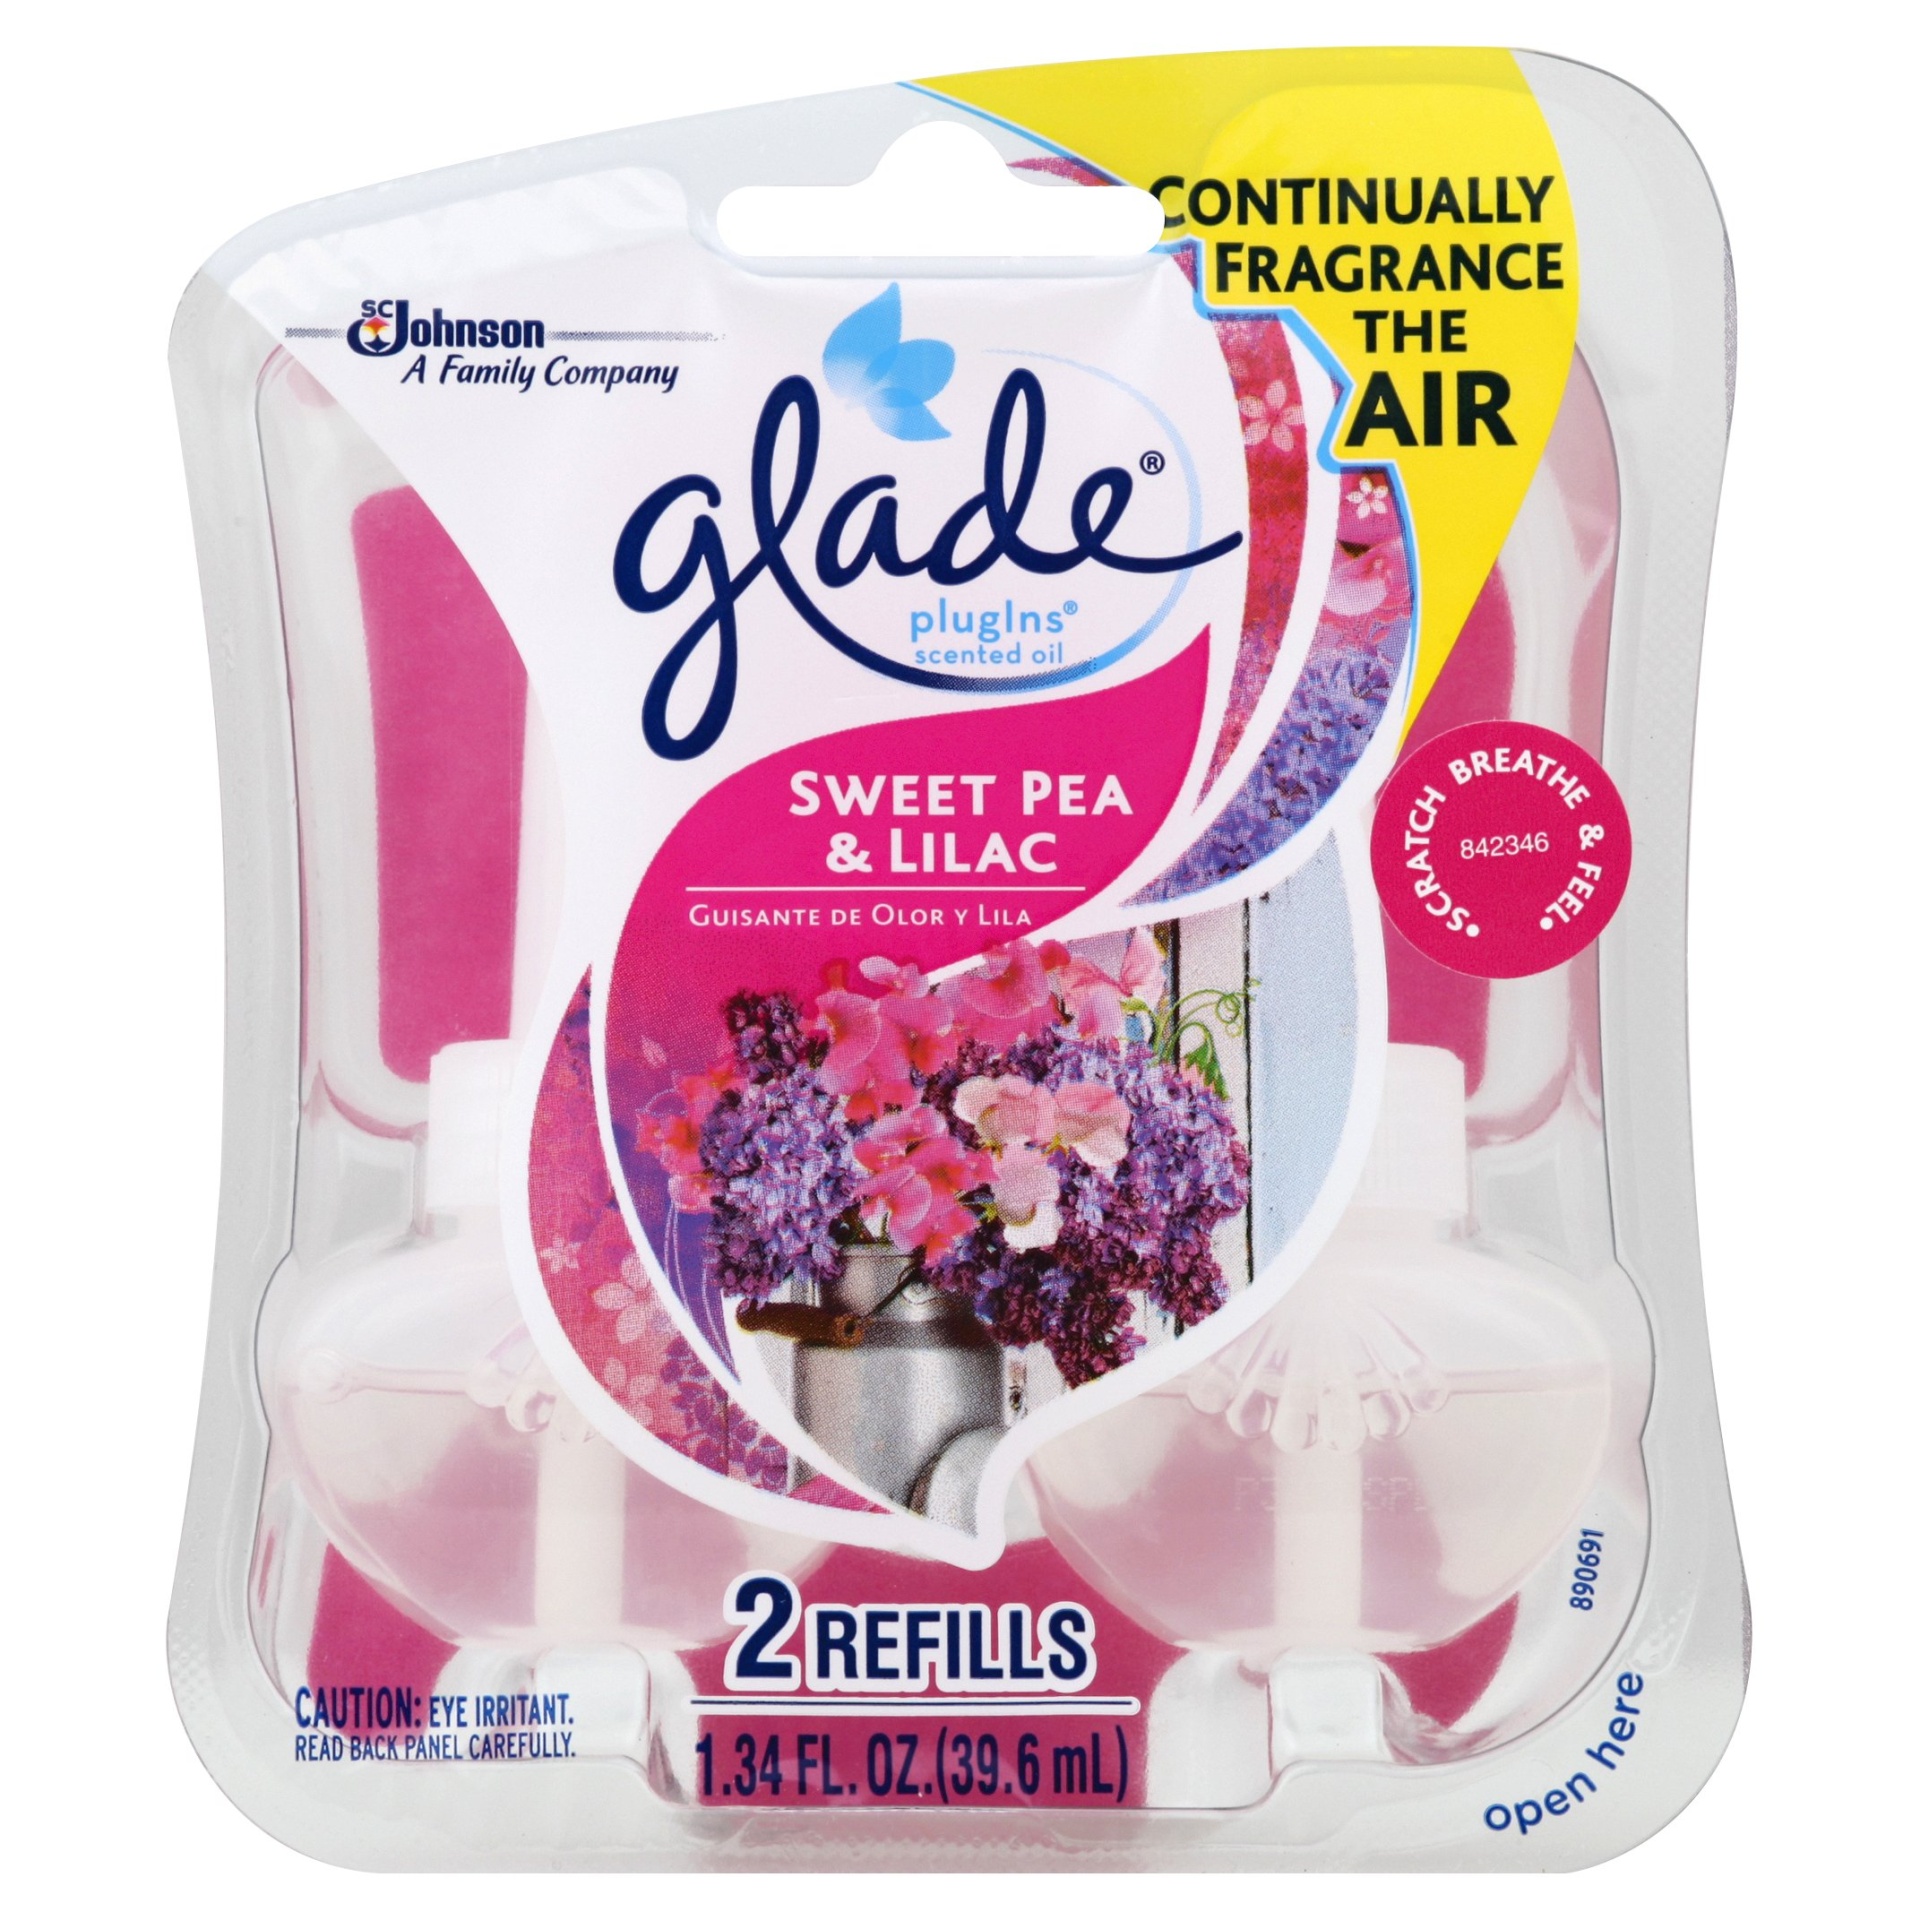 slide 1 of 2, Glade PlugIns Scented Oil Refills Sweet Pea & Lilac, 2 ct; 1.34 oz